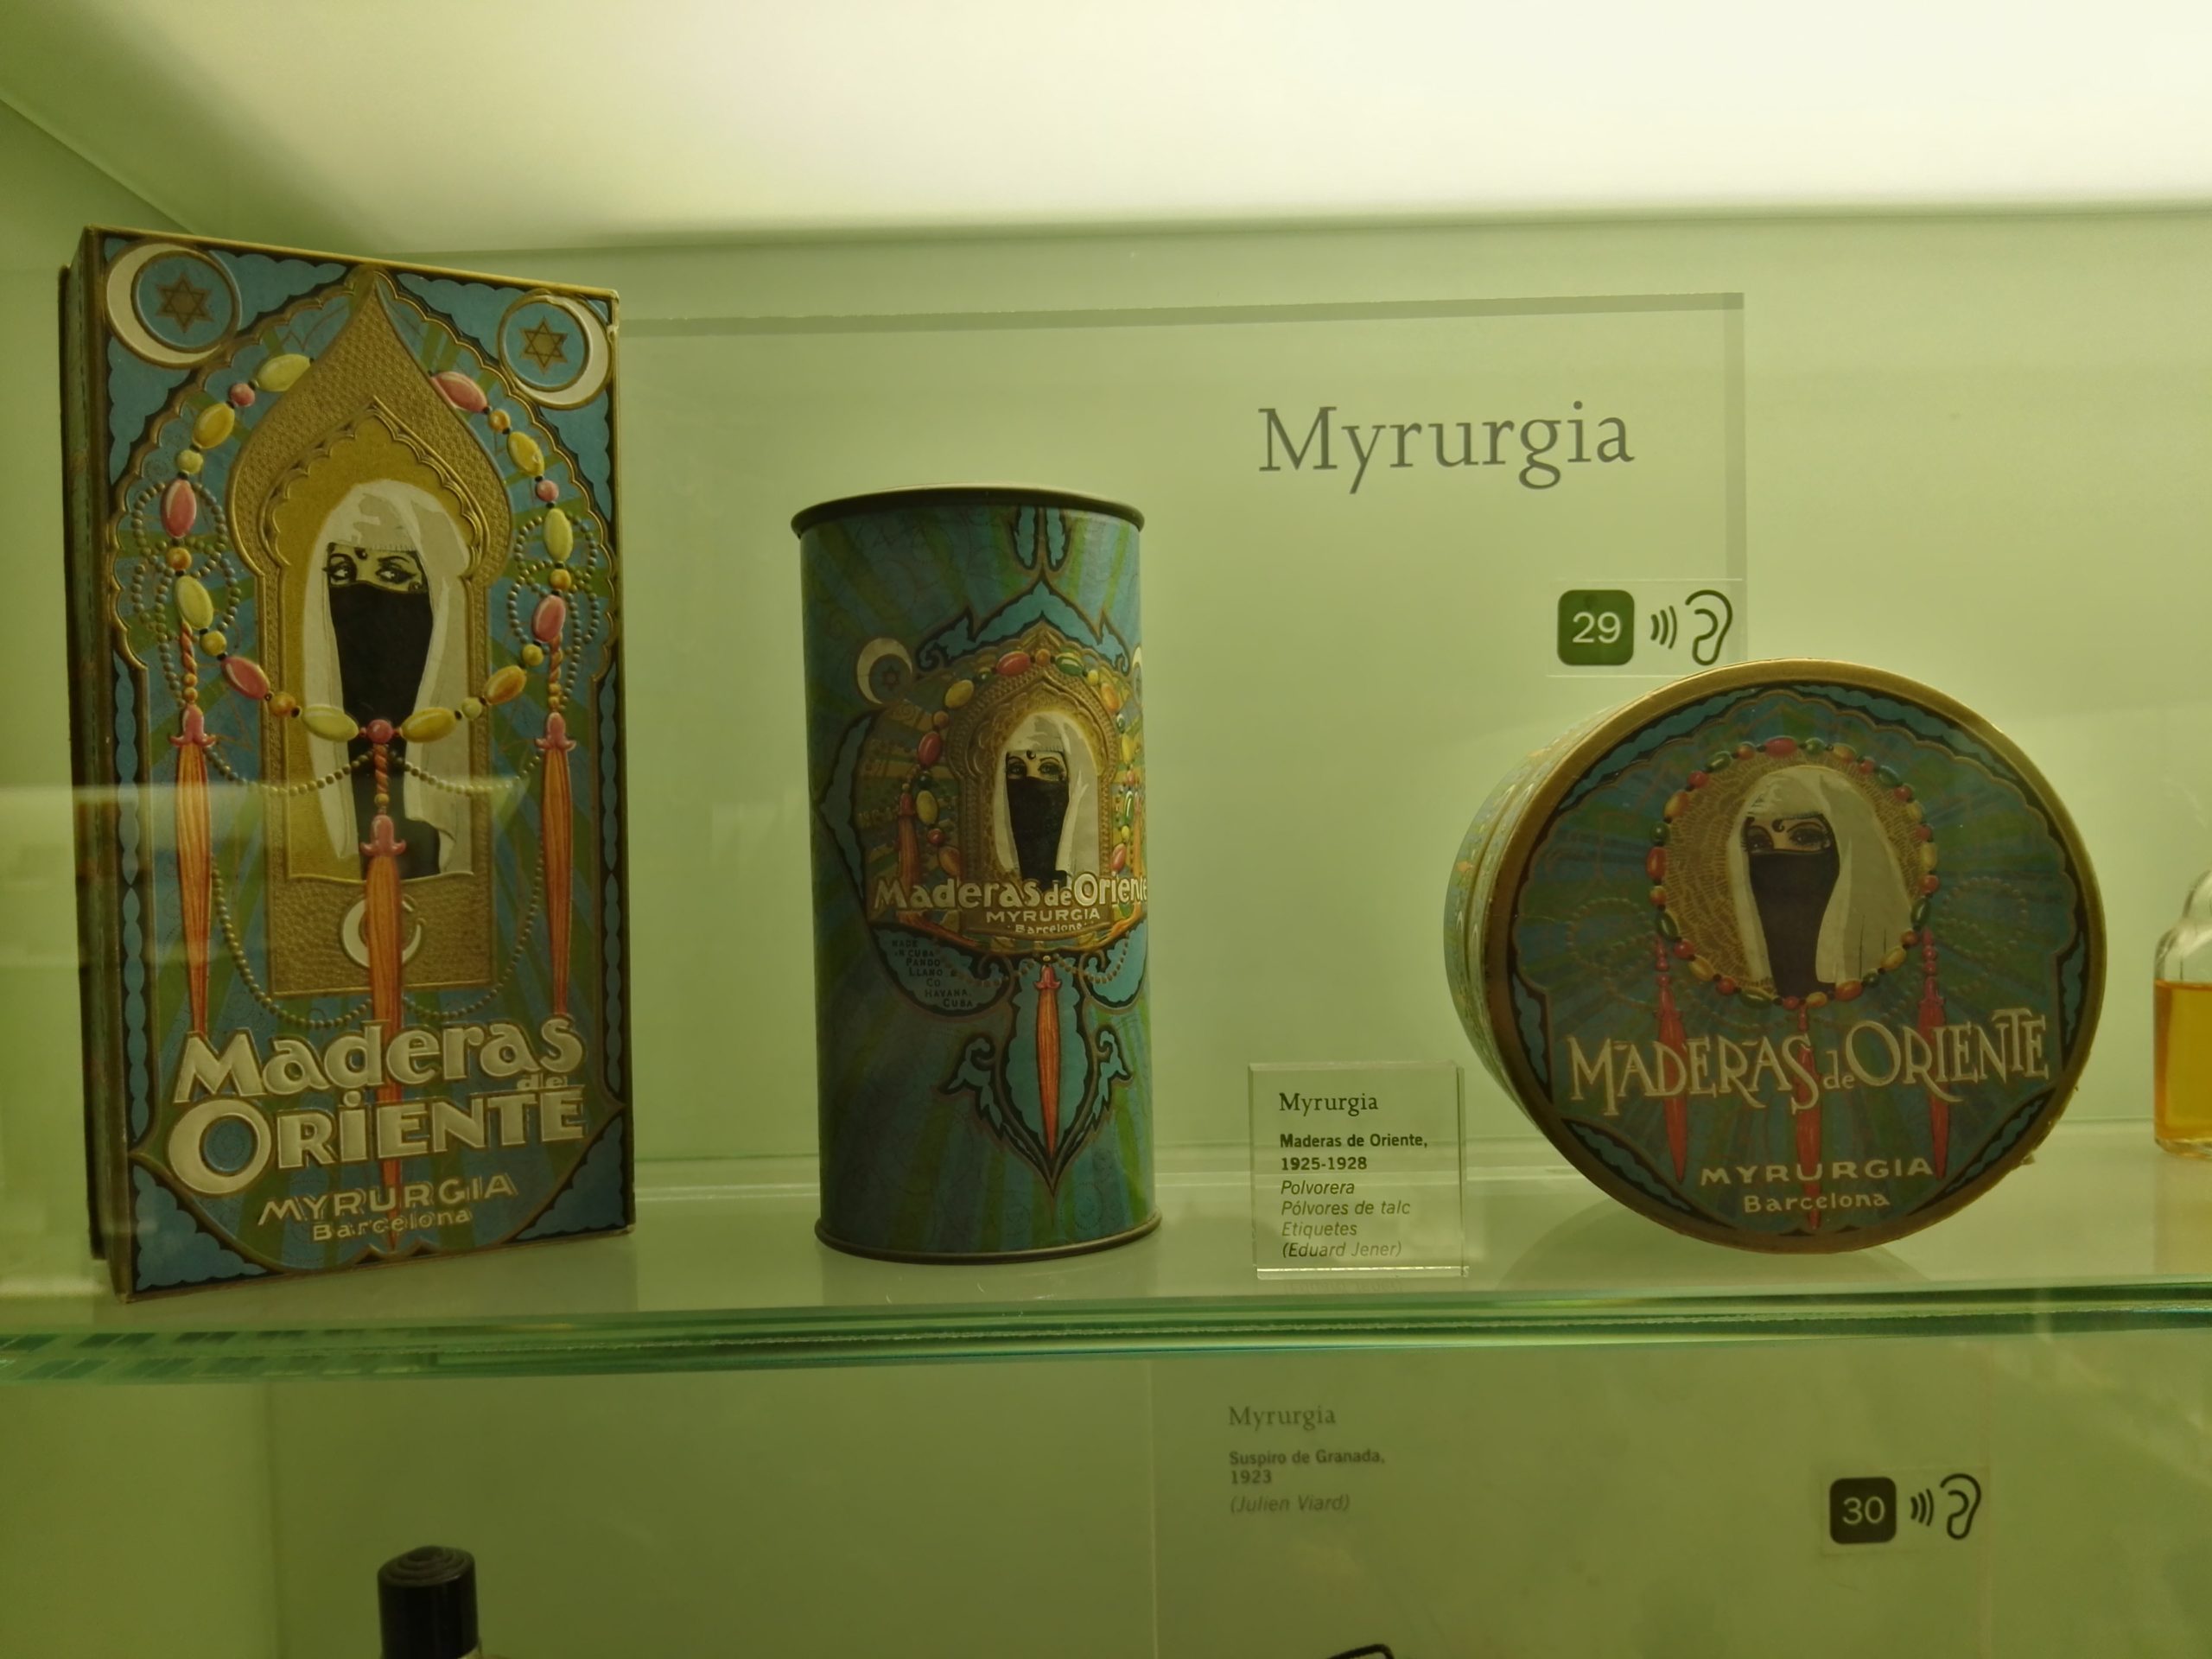 Maderas de Oriente from the collection of Museo del Perfume